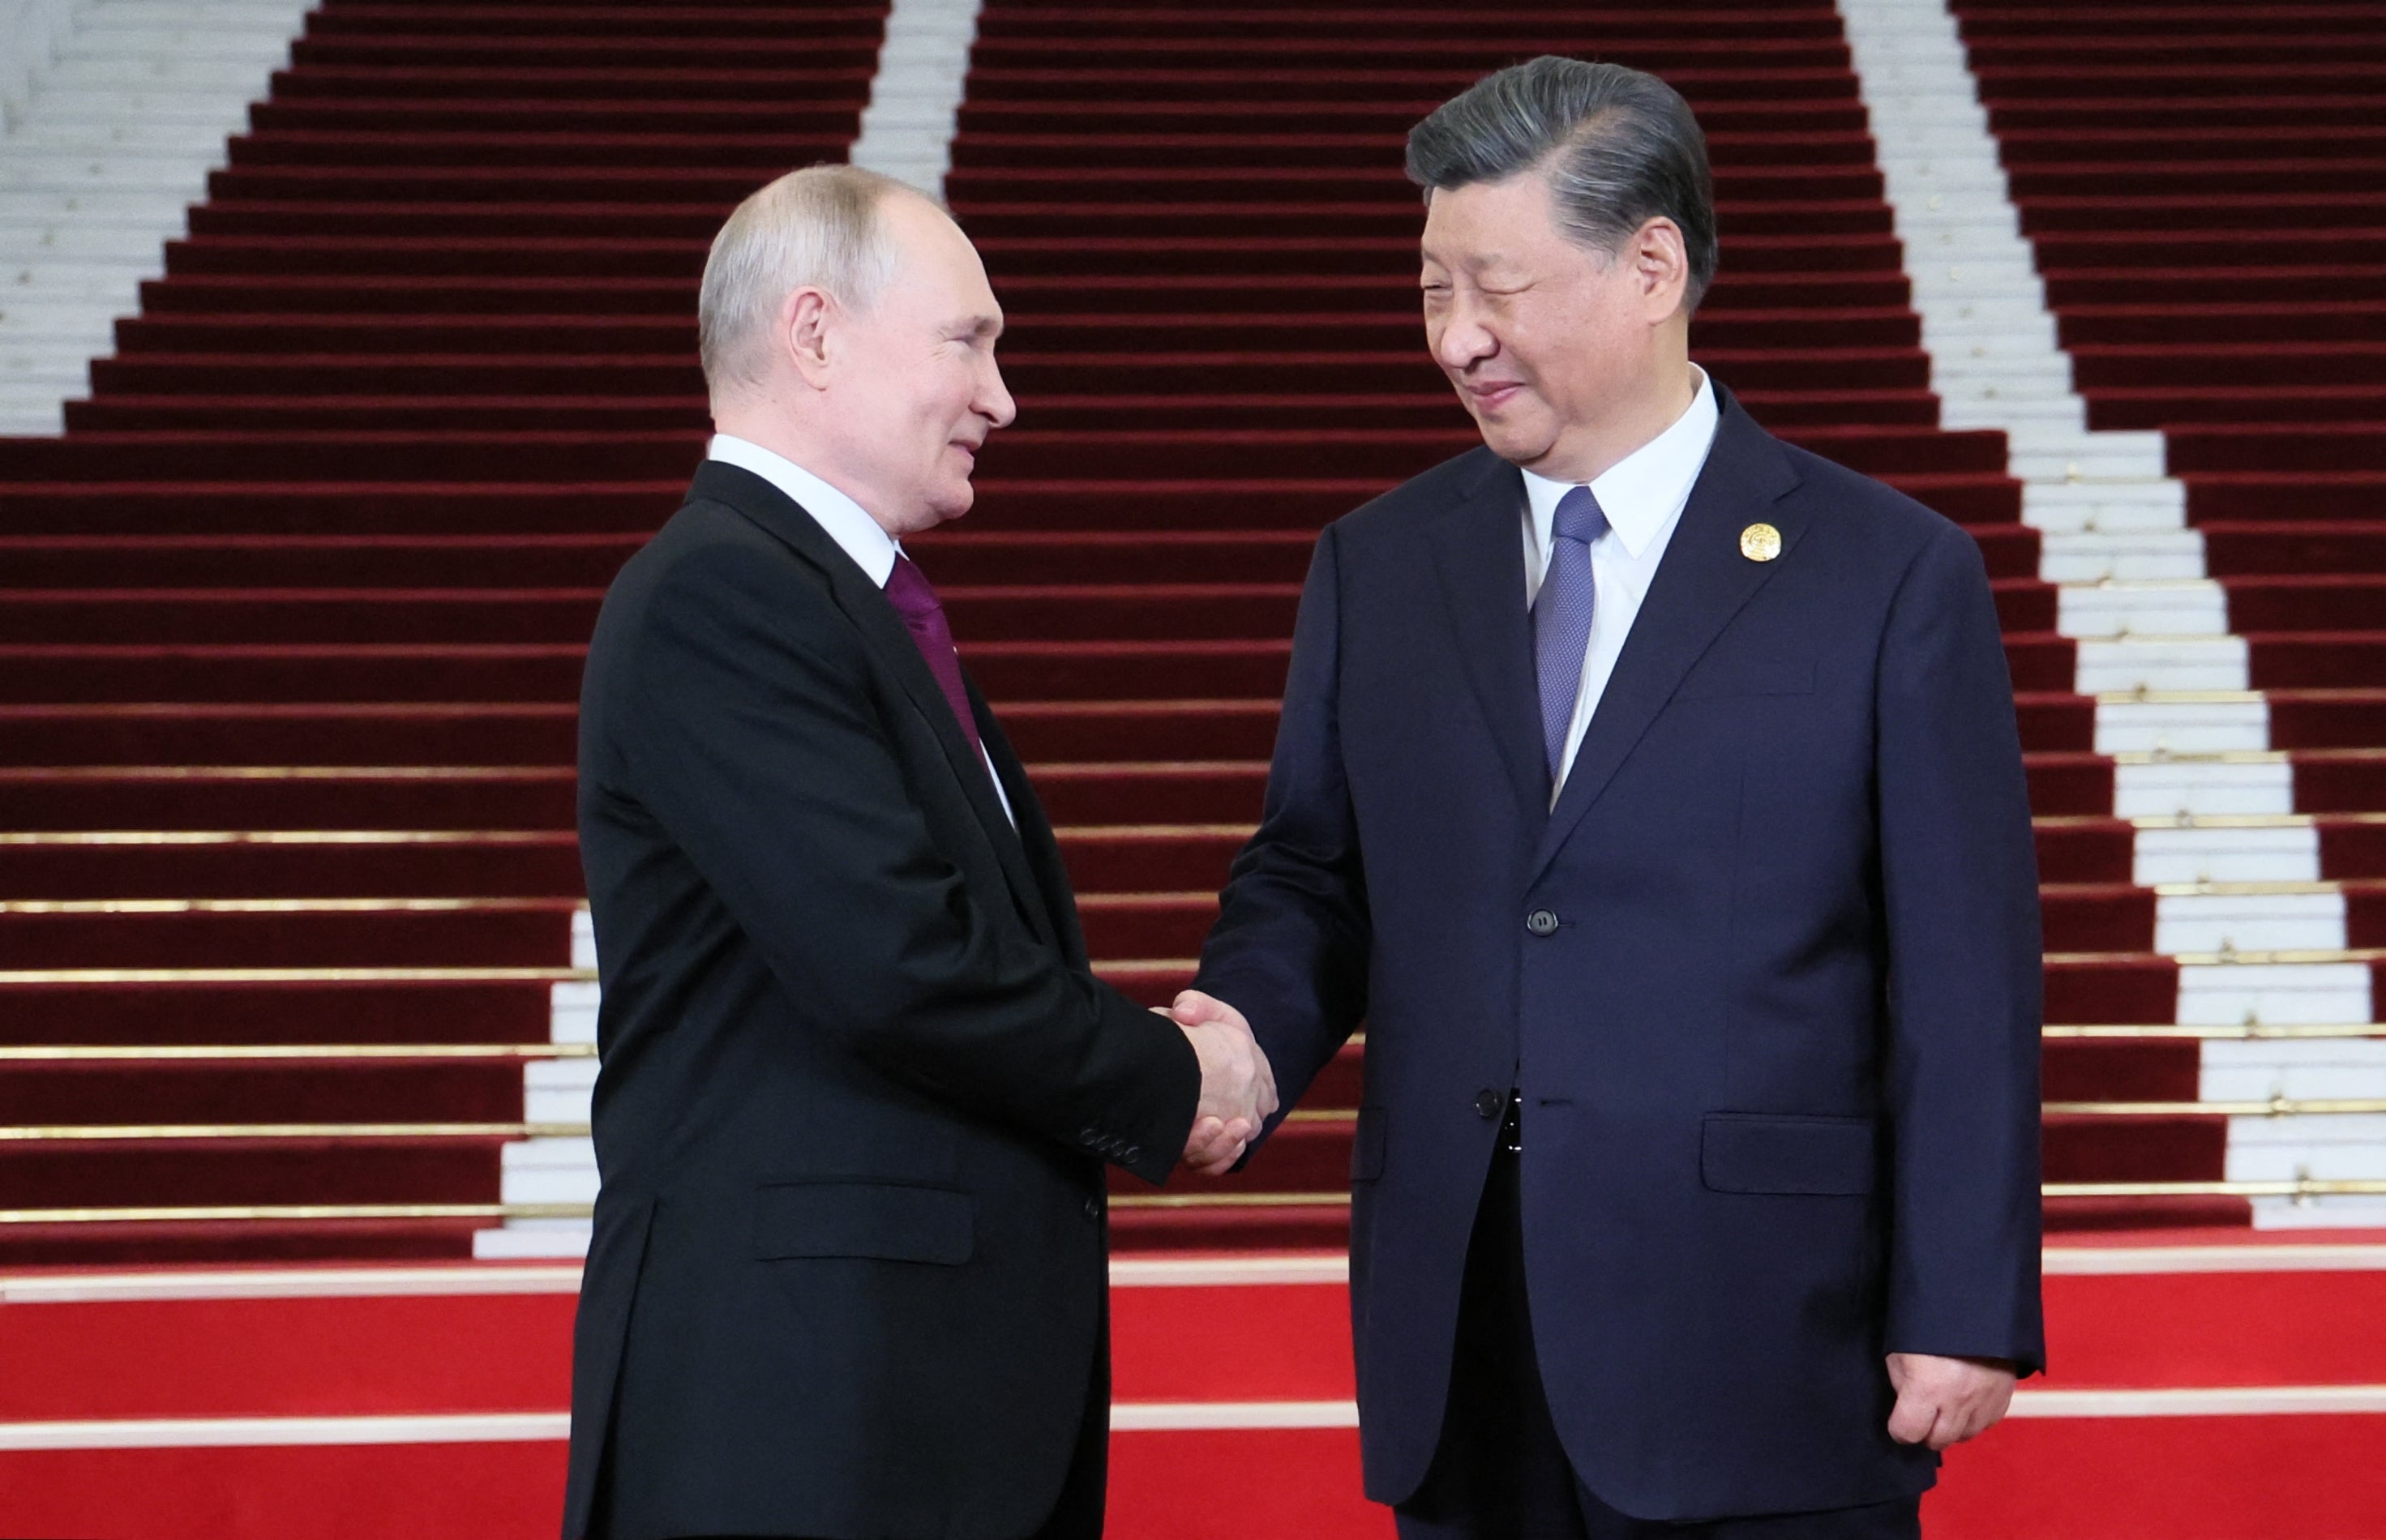 Russia's President Vladimir Putin and Chinese President Xi Jinping shaking hands during a welcoming ceremony at the Third Belt and Road Forum in Beijing